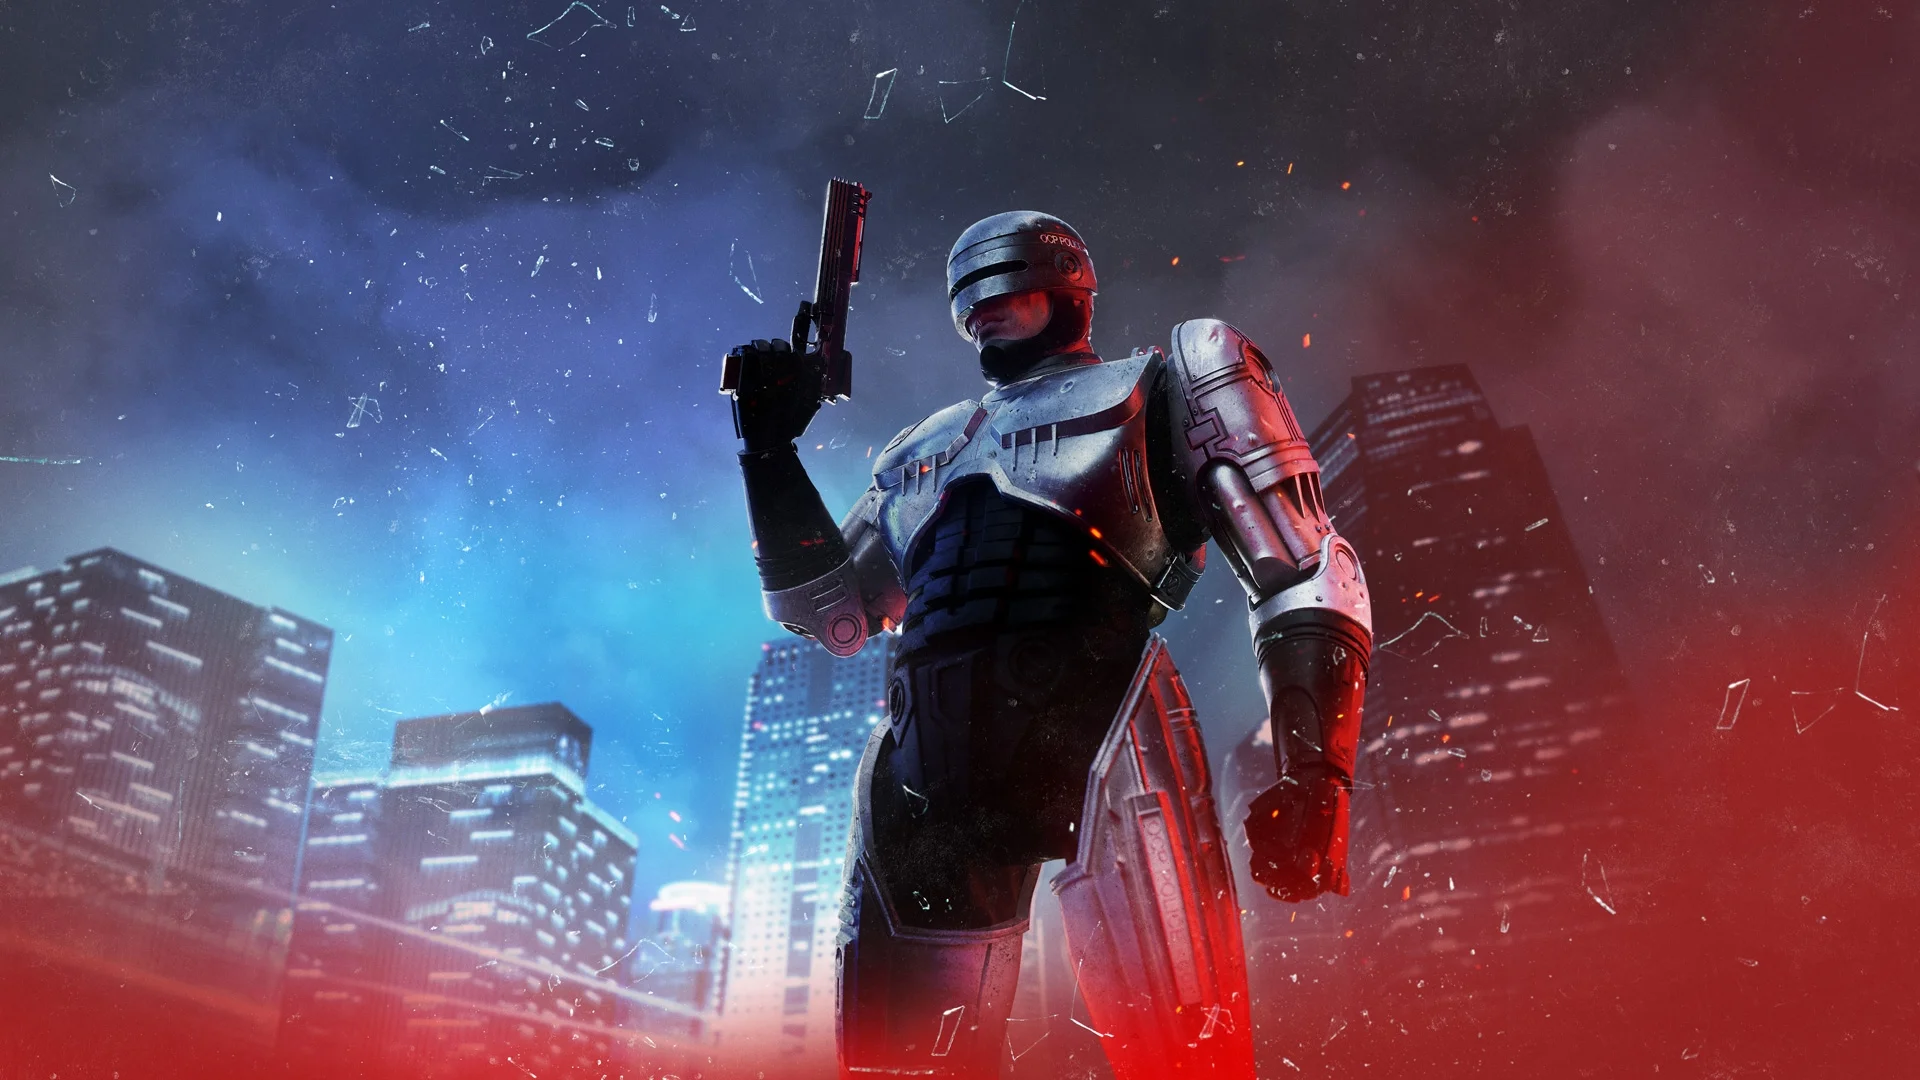 RoboCop: Rogue City developers pushed back the release date of the game, but did not announce it